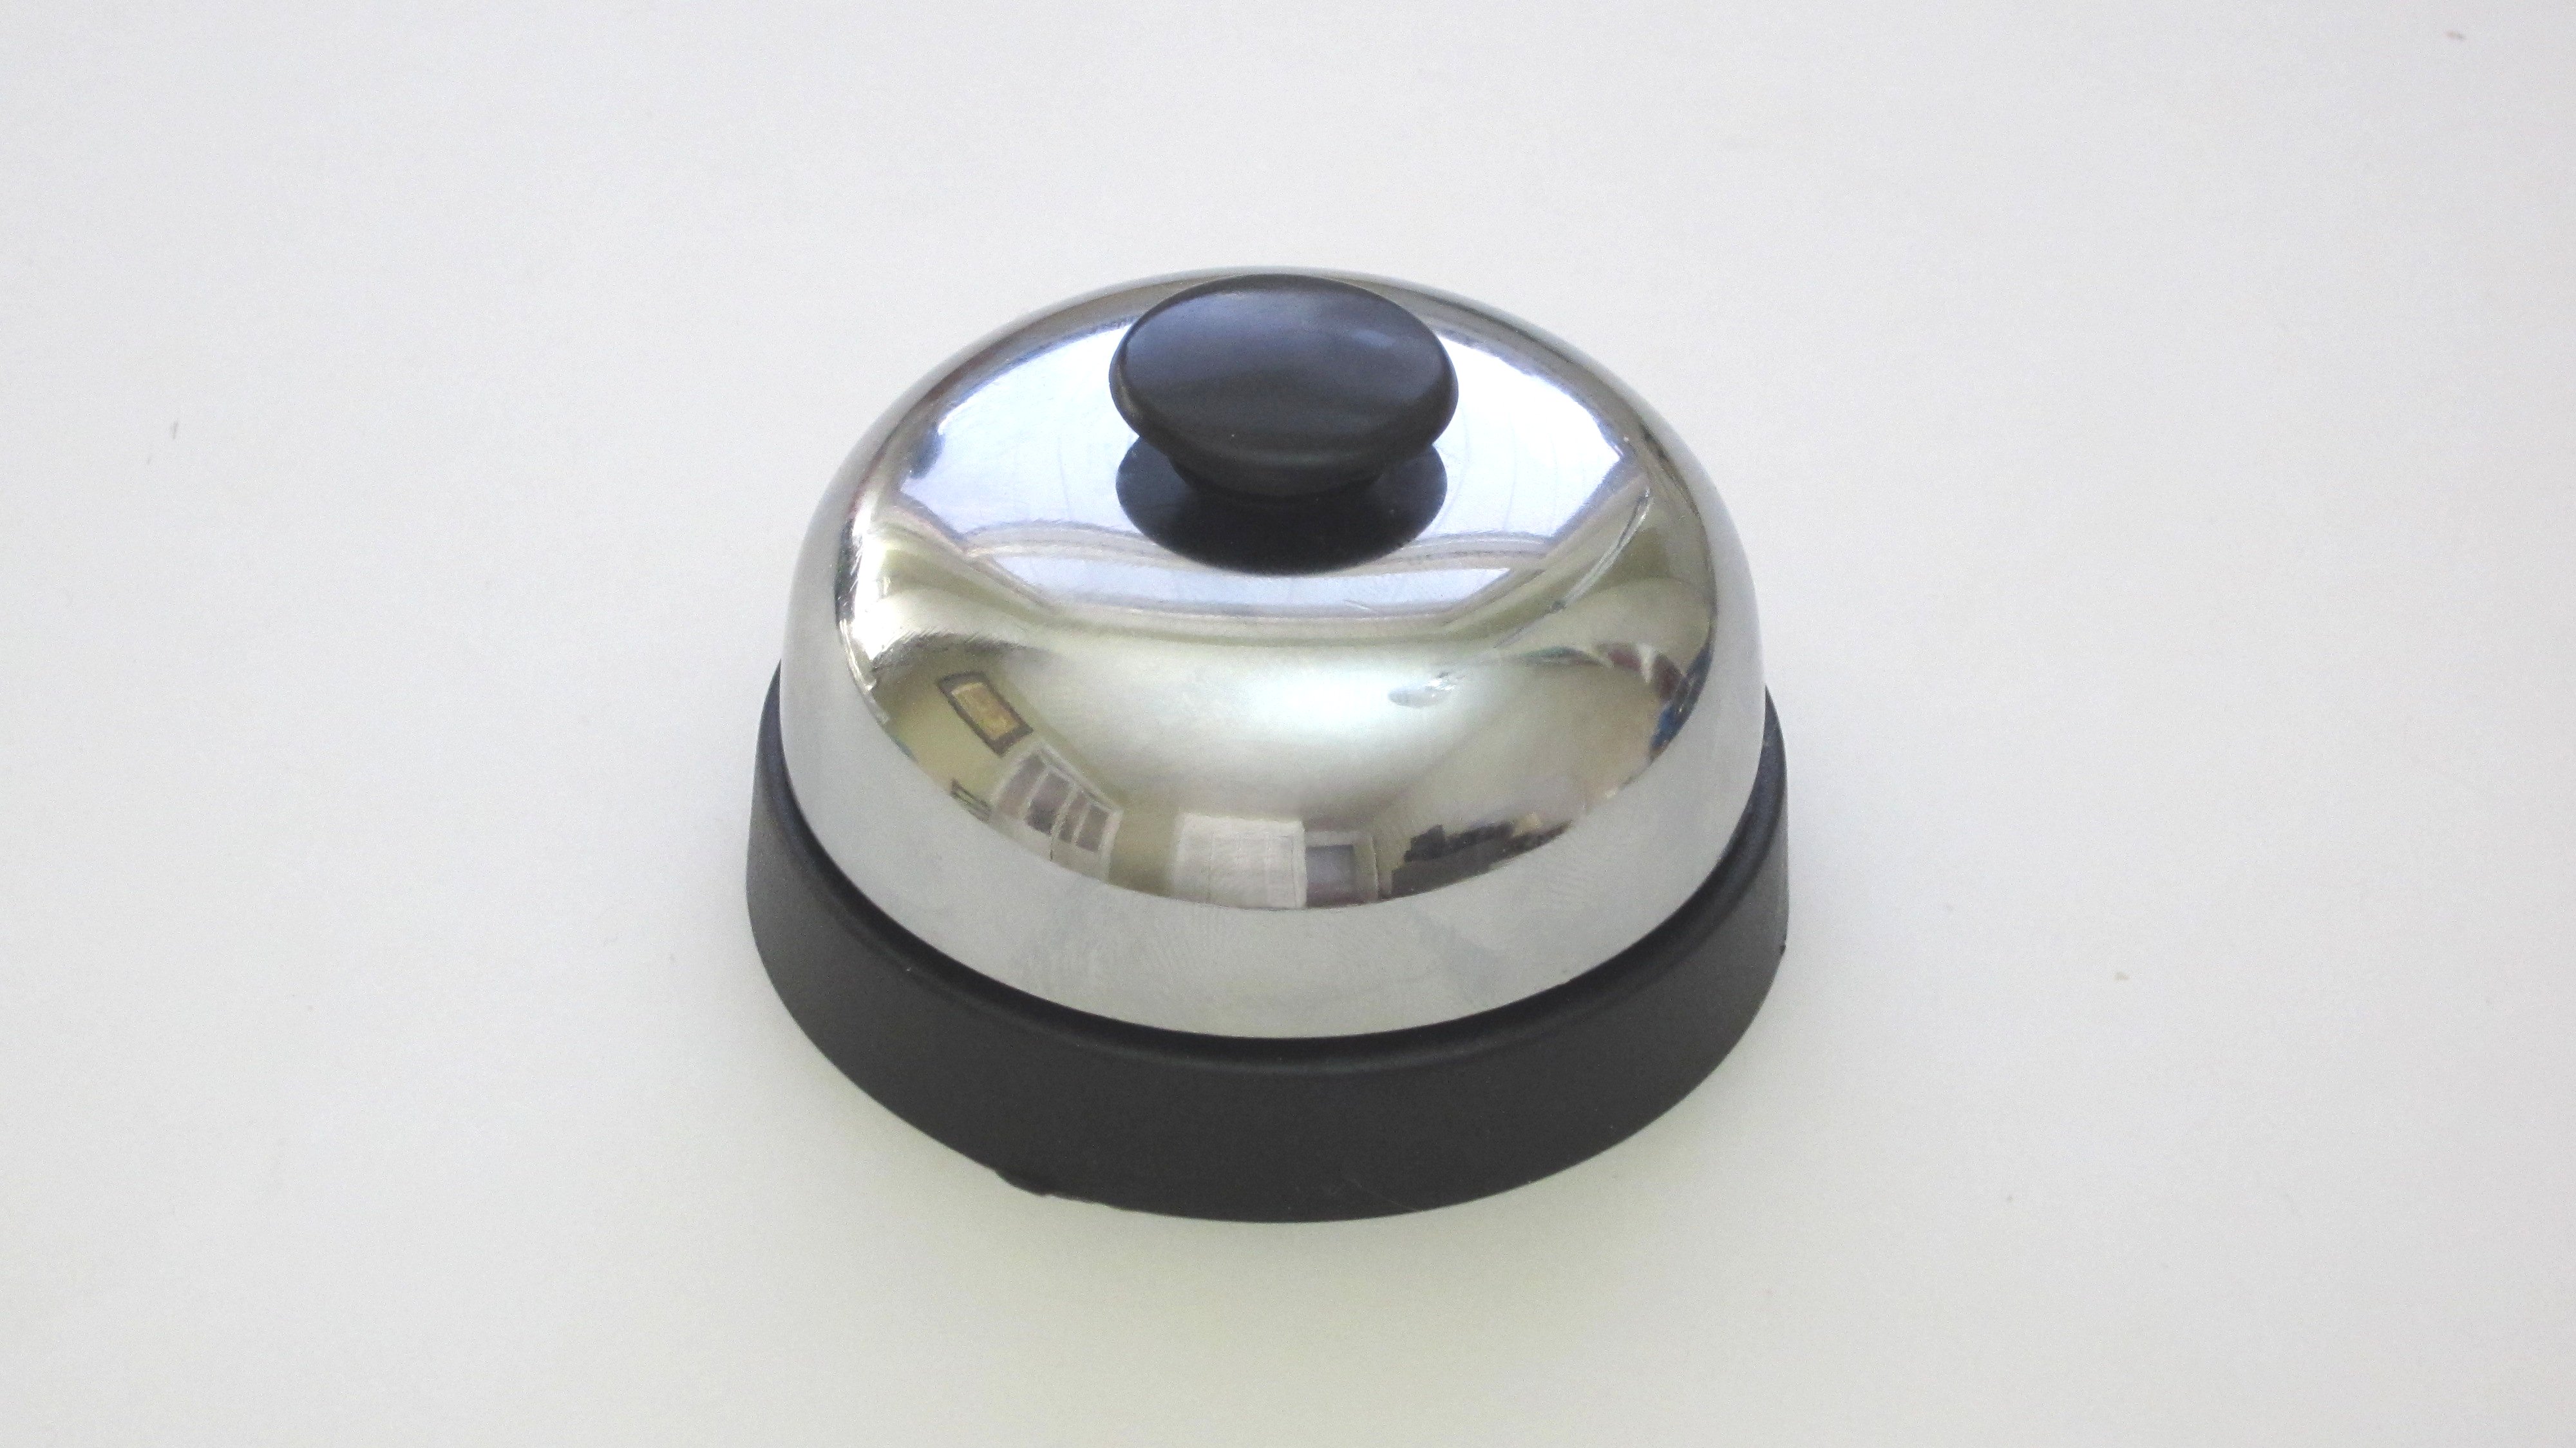 DIY Hacks & How To’s: Desk Bell That Plays Sound Effects